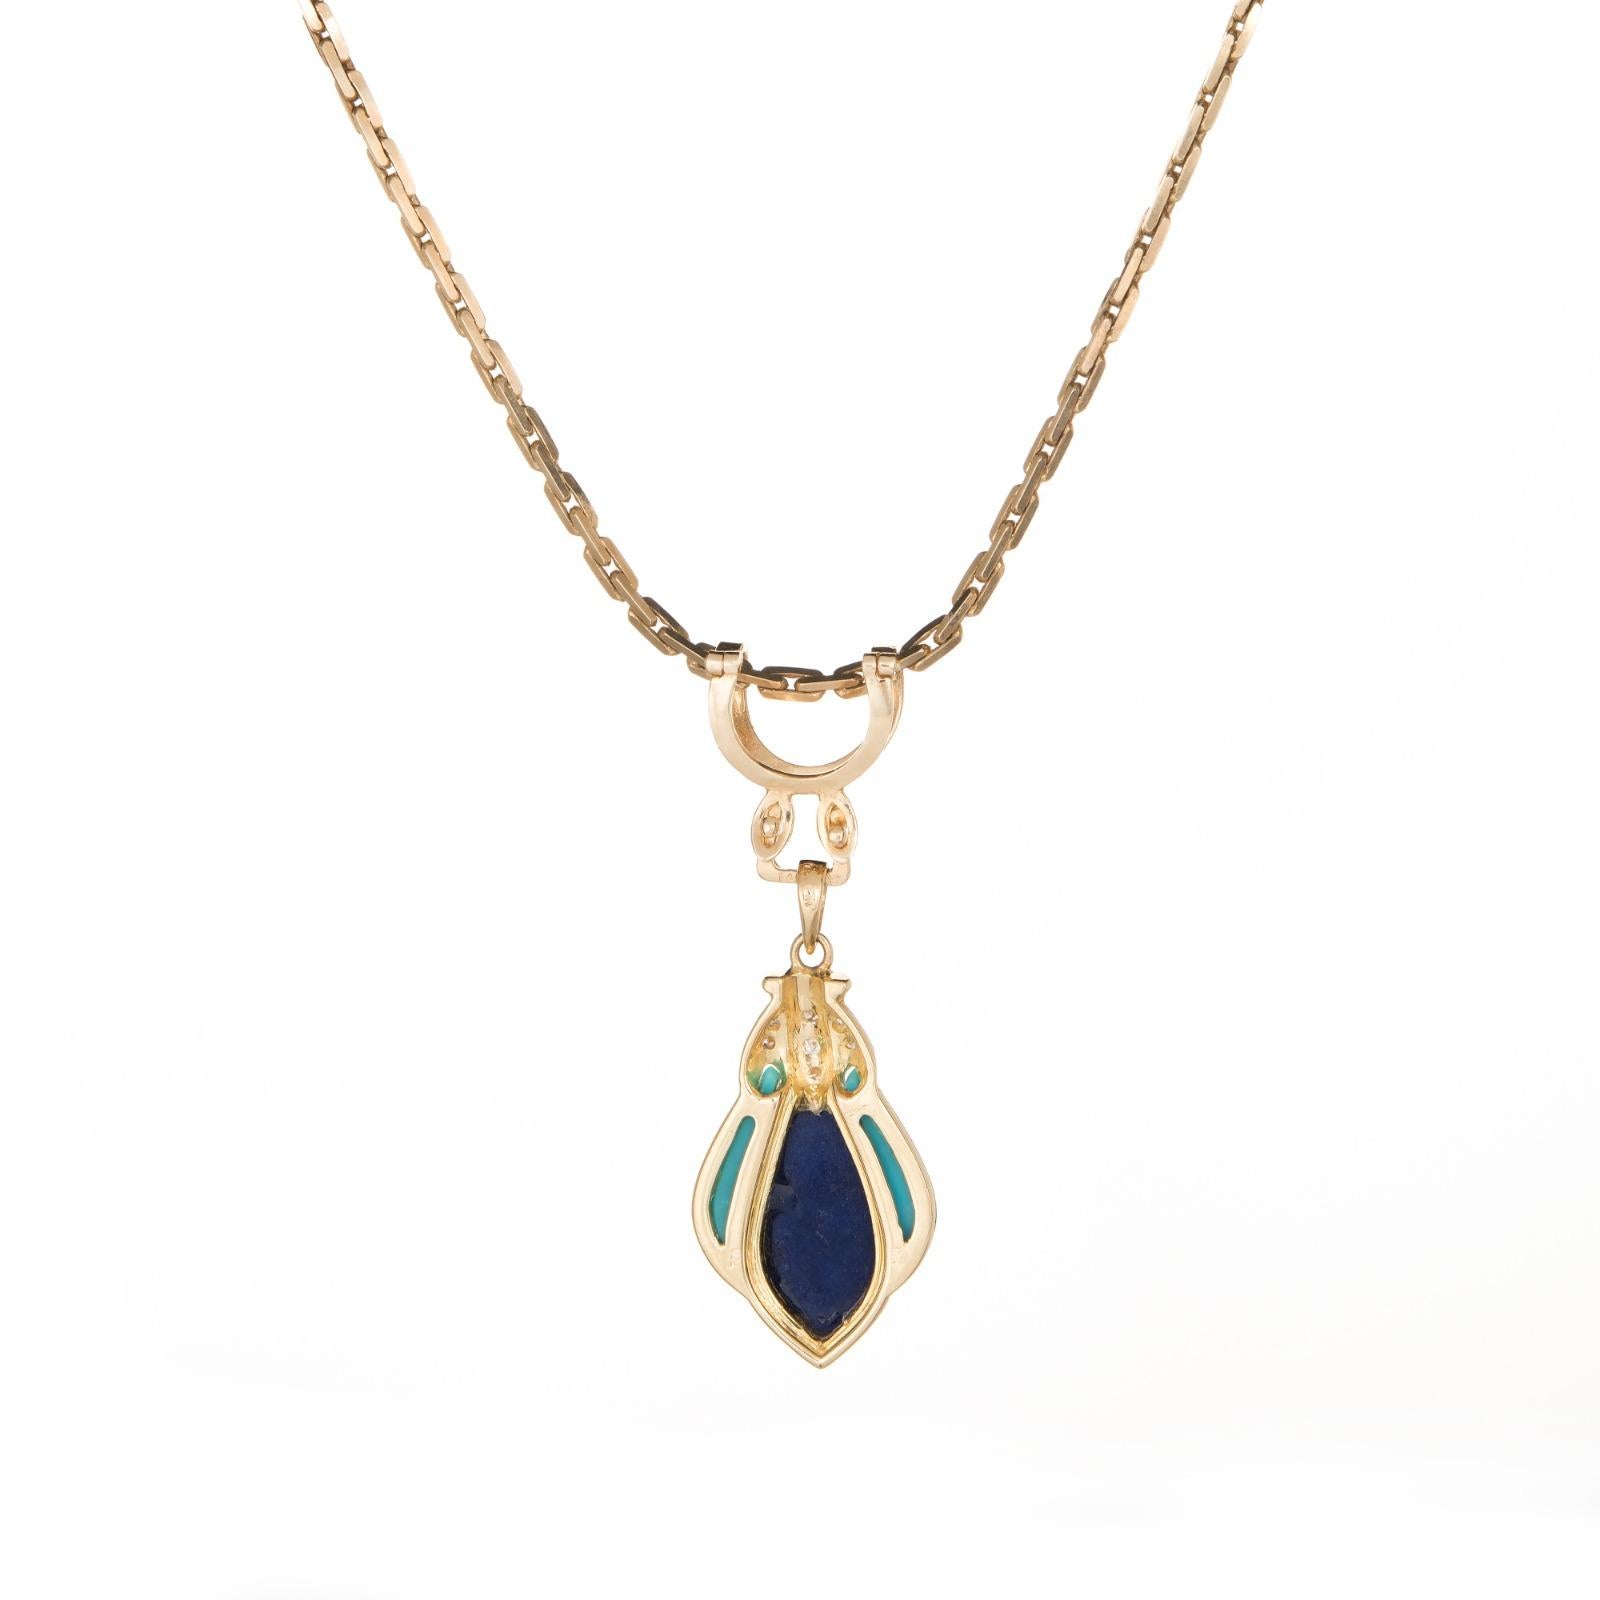 Finely detailed vintage diamond, turquoise & lapis lazuli necklace crafted in 14 karat yellow gold (circa 1960s to 1970s). 

Cabochon cut lapis lazuli and turquoise is inlaid into the mount, accented with an estimated 0.08 carats of diamonds